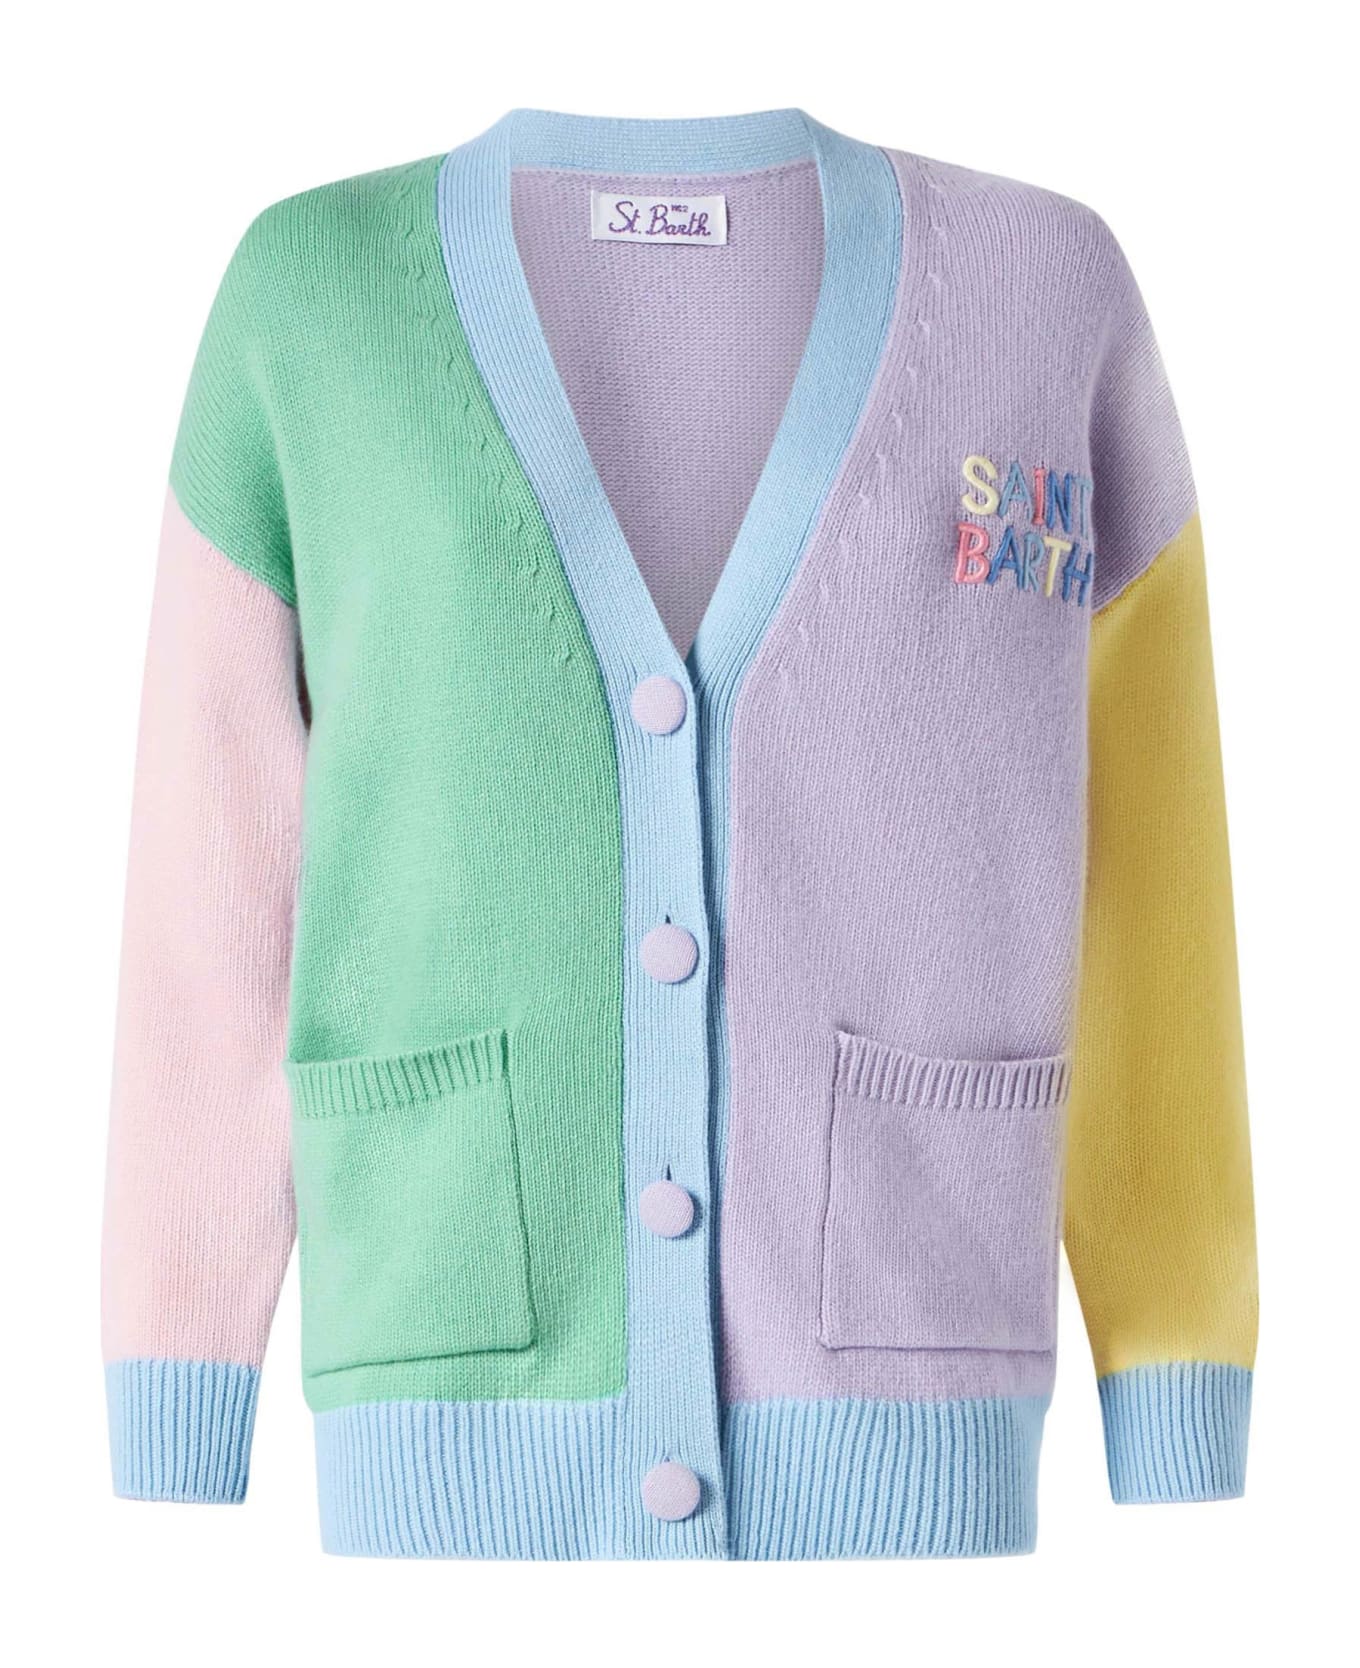 MC2 Saint Barth Woman Cardigan With Pockets And Saint Barth Embroidery - MULTICOLOR